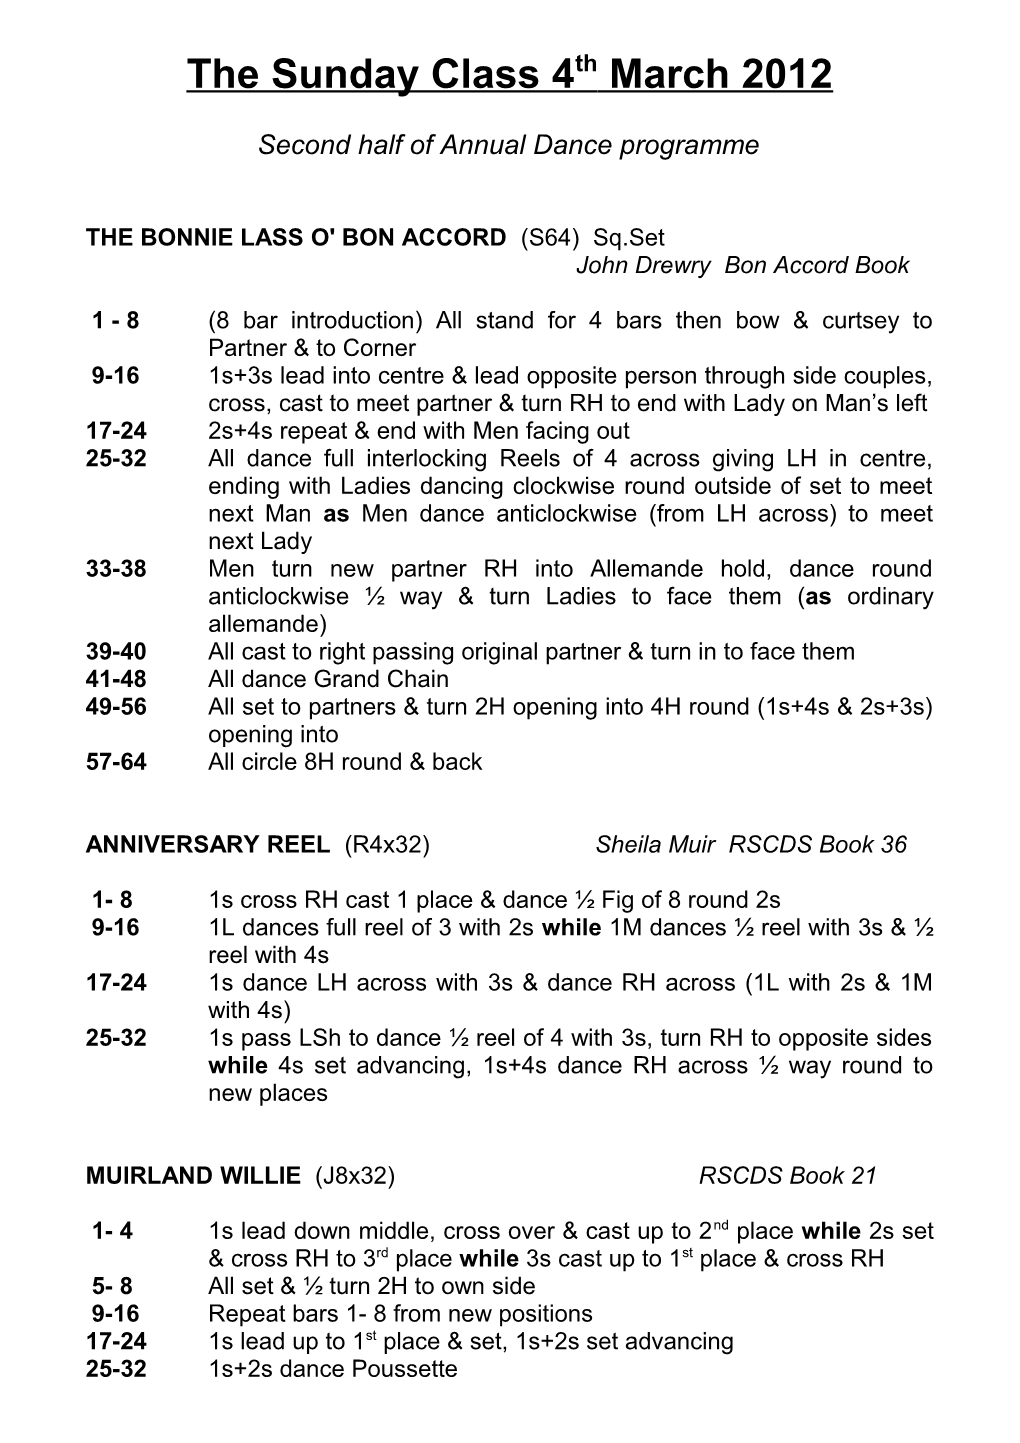 Second Half of Annual Dance Programme